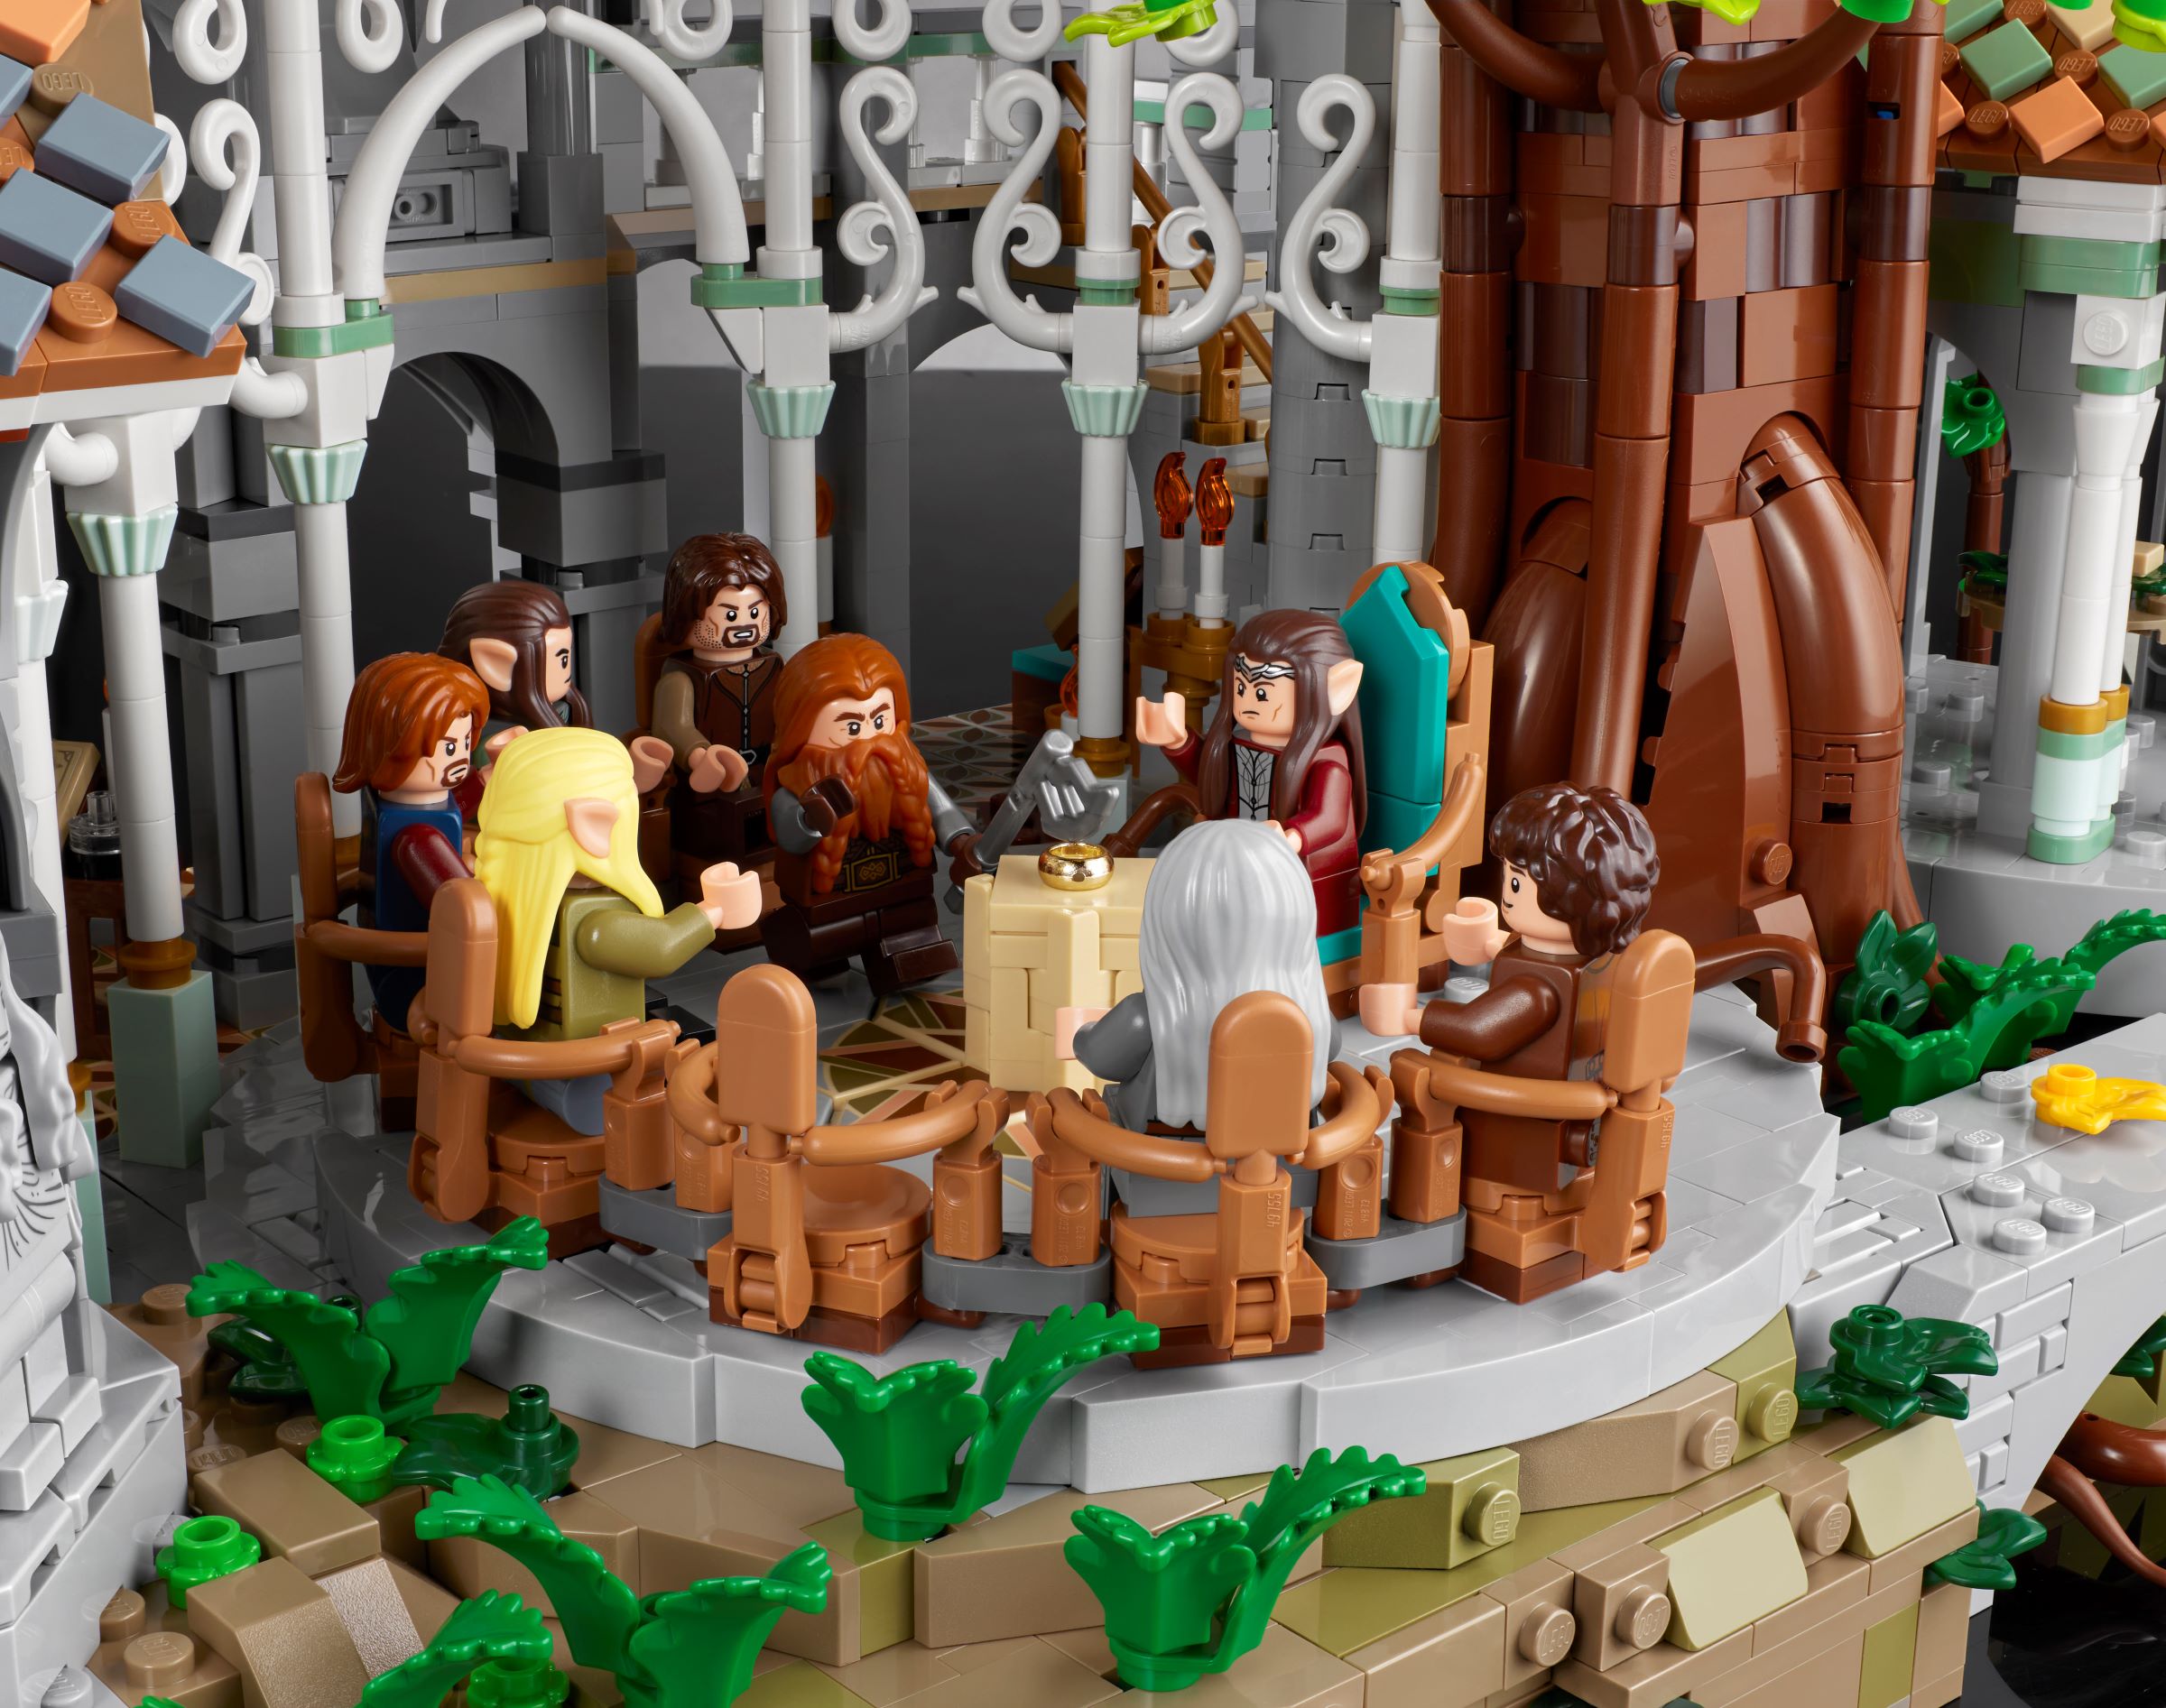 THE LORD OF THE RINGS: RIVENDELL™ 10316, Lord of the Rings™